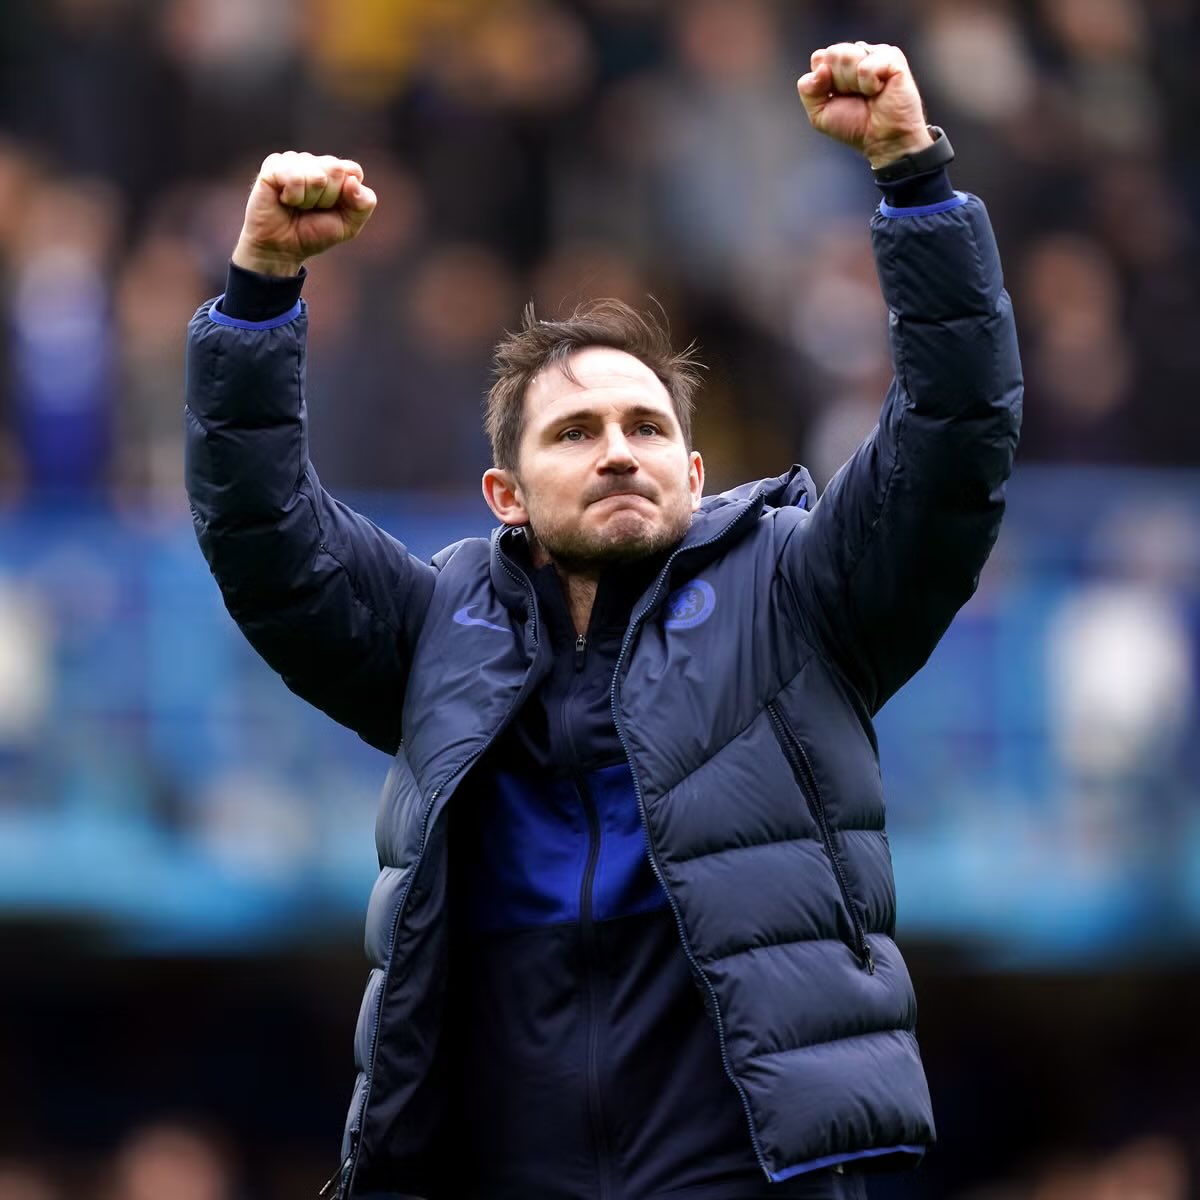 Word is that Lampard could be the next Sunderland manager. 

Thoughts? 

#SAFC #FrankLampard